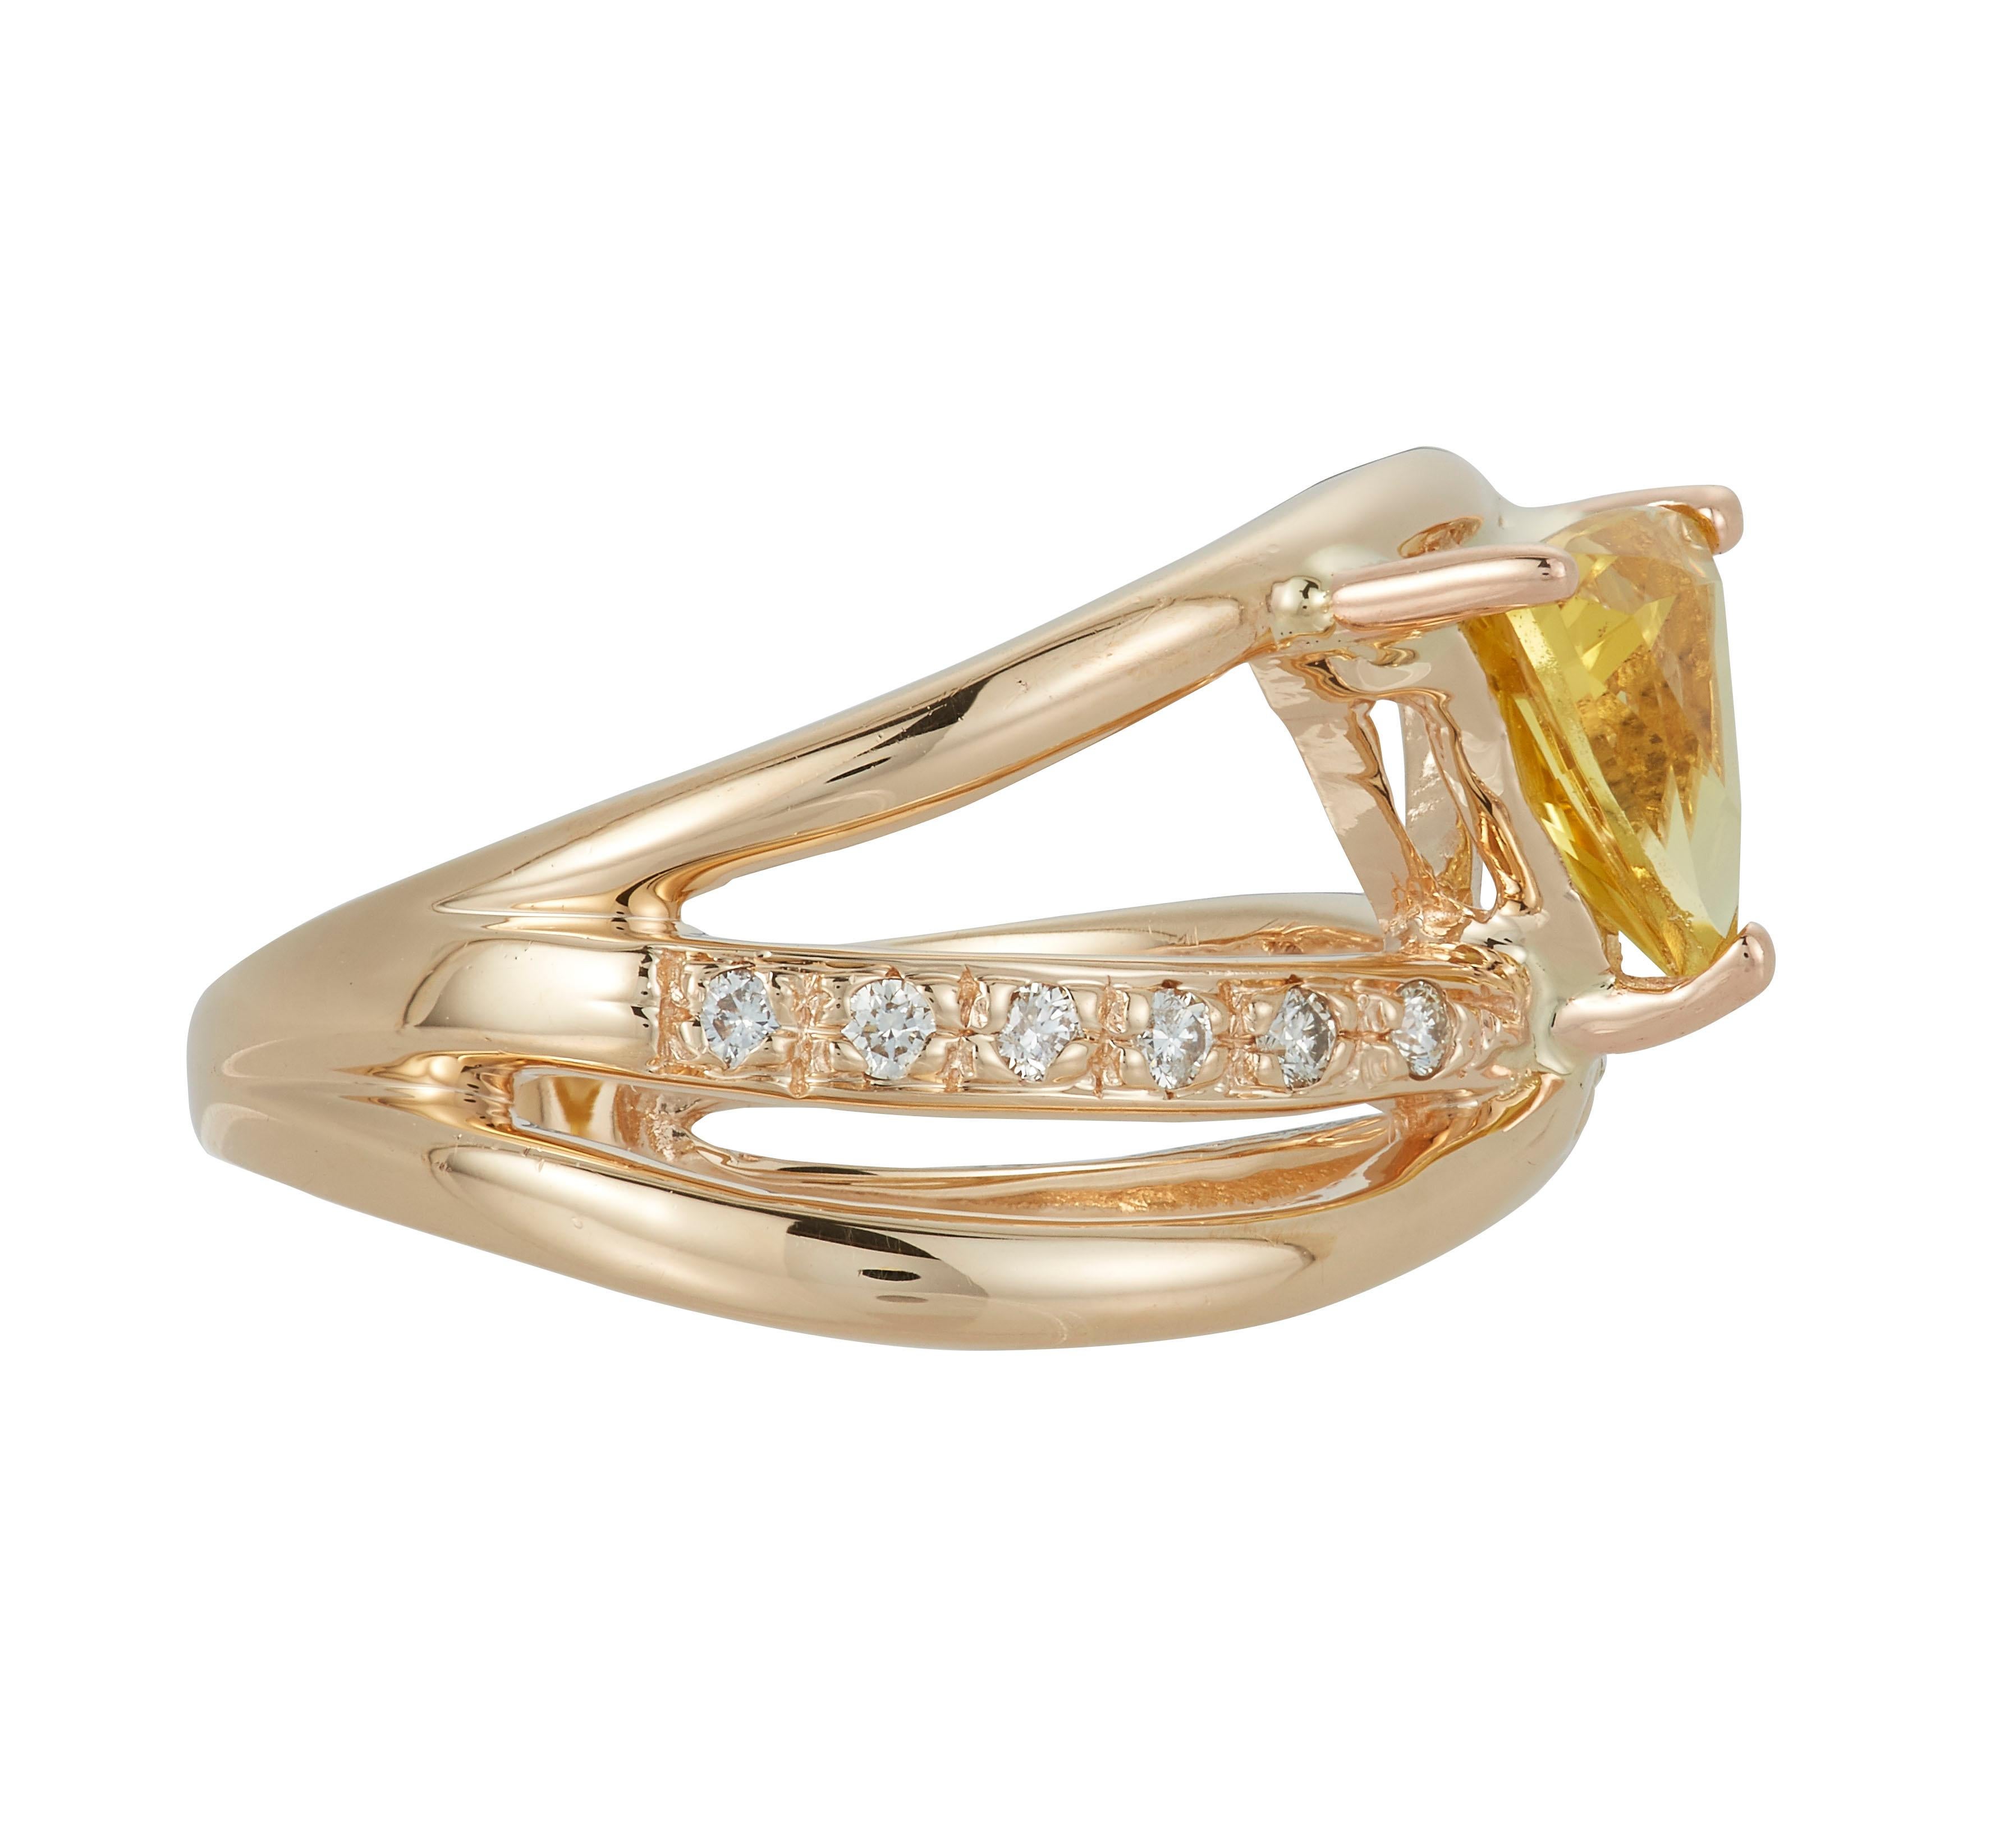 14K Yellow Gold
1 Trillion Yellow Beryl at 0.95 Carats - Measuring 7mm
13 Brilliant Round White Diamonds at 0.20 Carats- Color: H-I / Clarity: SI

Alberto offers complimentary sizing on all rings.

Fine one-of-a-kind craftsmanship meets incredible